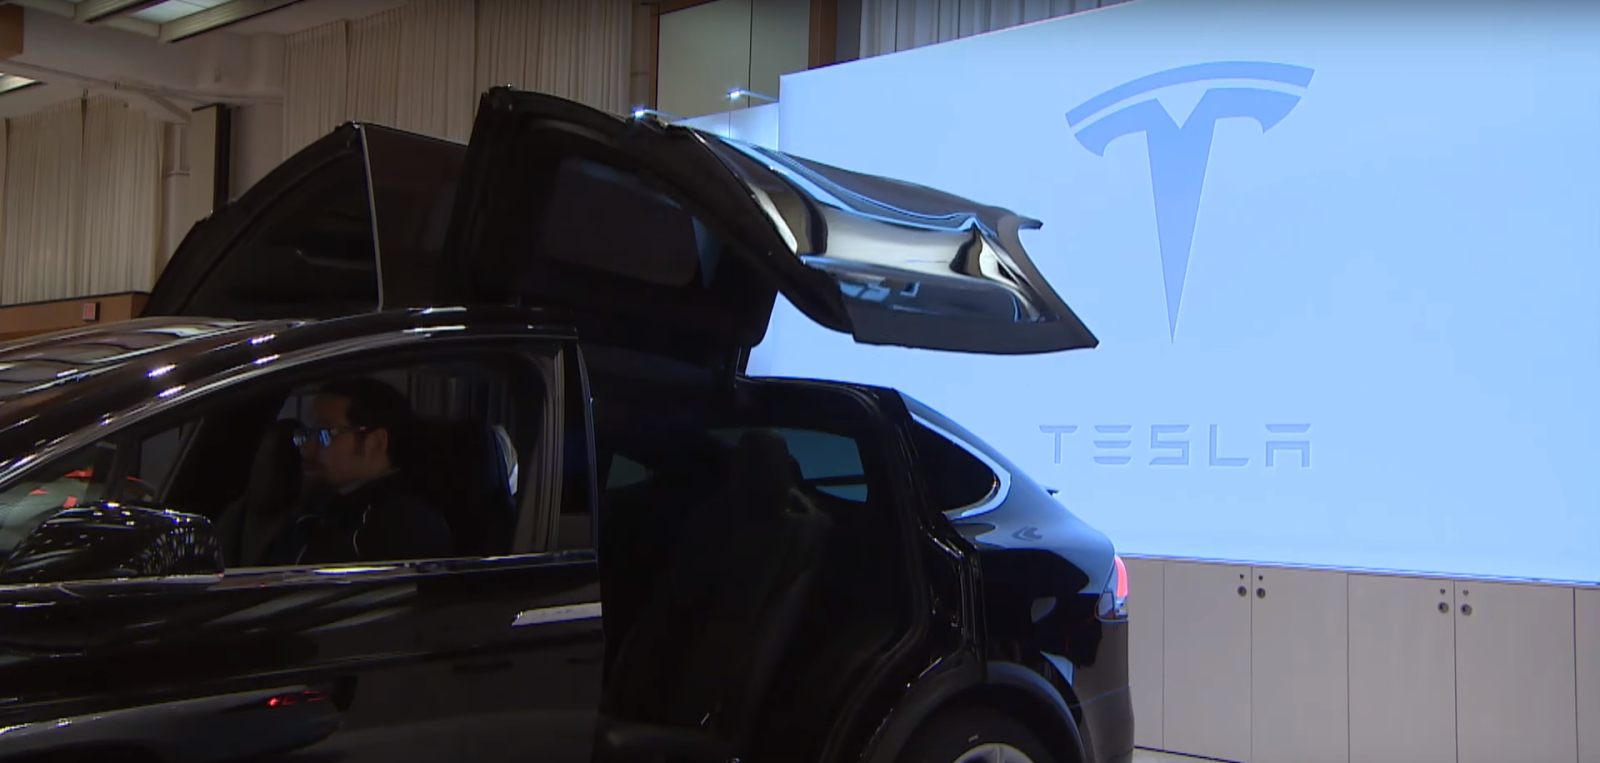 Tesla Model X made its auto show and Canadian debut at the Toronto